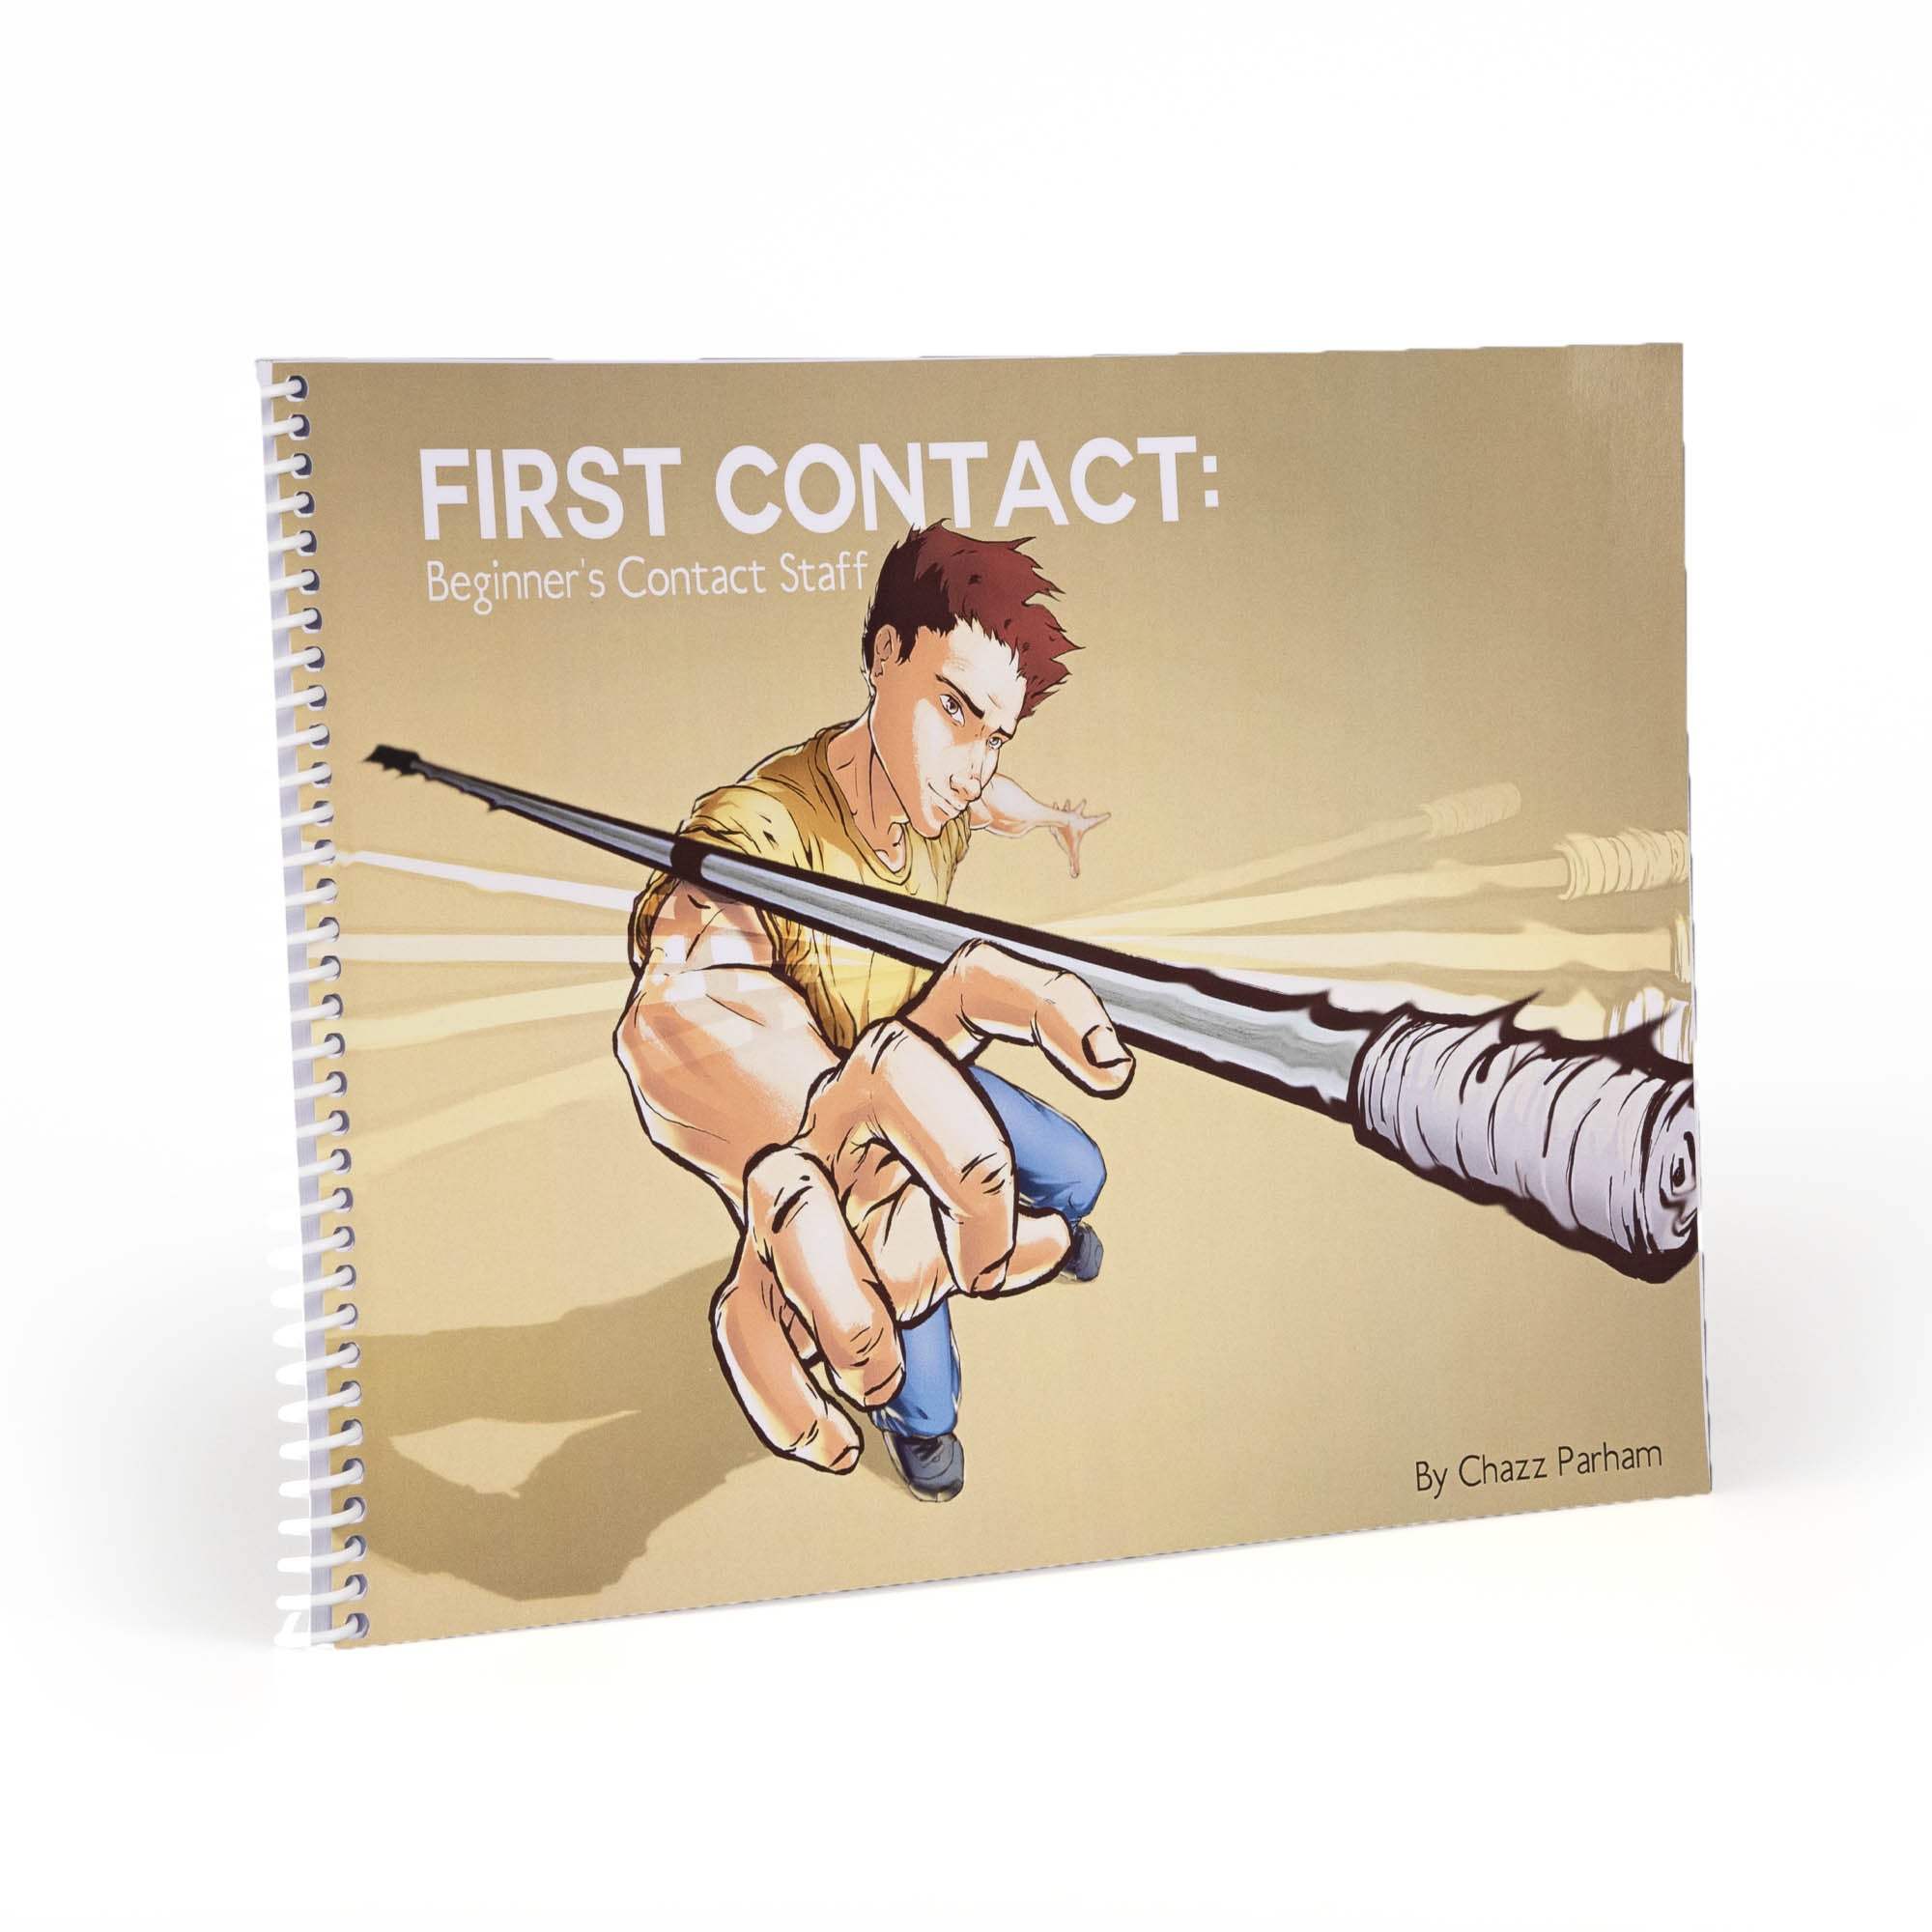 The back of the First contact book at a slight angle on a white background